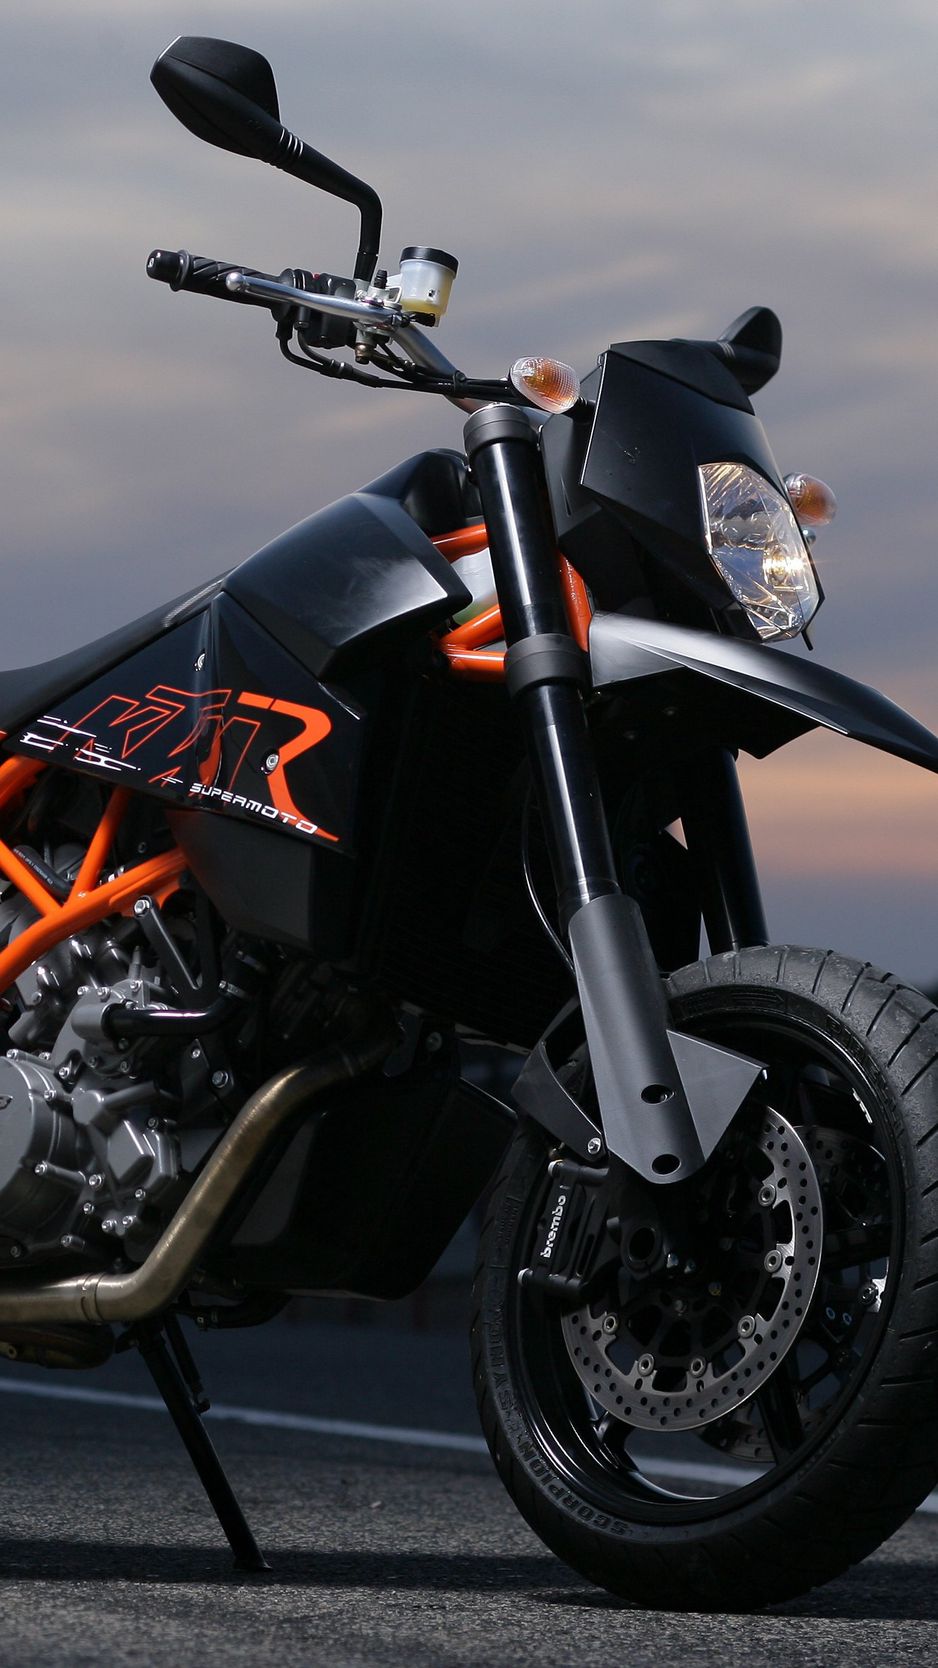 Download wallpaper 938x1668 ktm 950 supermoto r, ktm 950 sm, motorcycle  iphone 8/7/6s/6 for parallax hd background